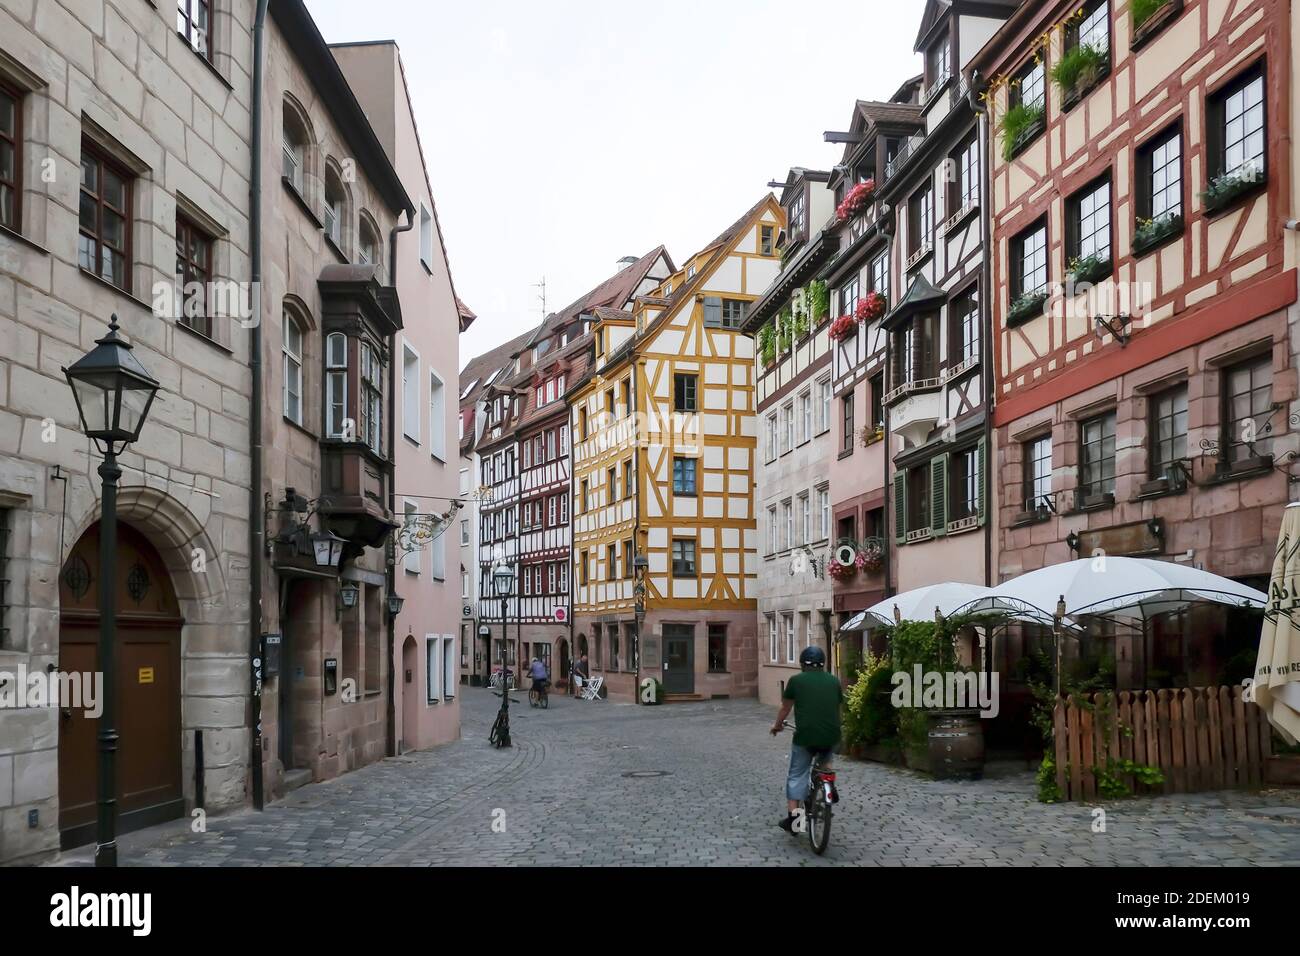 Old Bavarian city with cobbled stone streets and traditional houses. Nurnberg is second-largest city in Bavaria, popul. Stock Photo